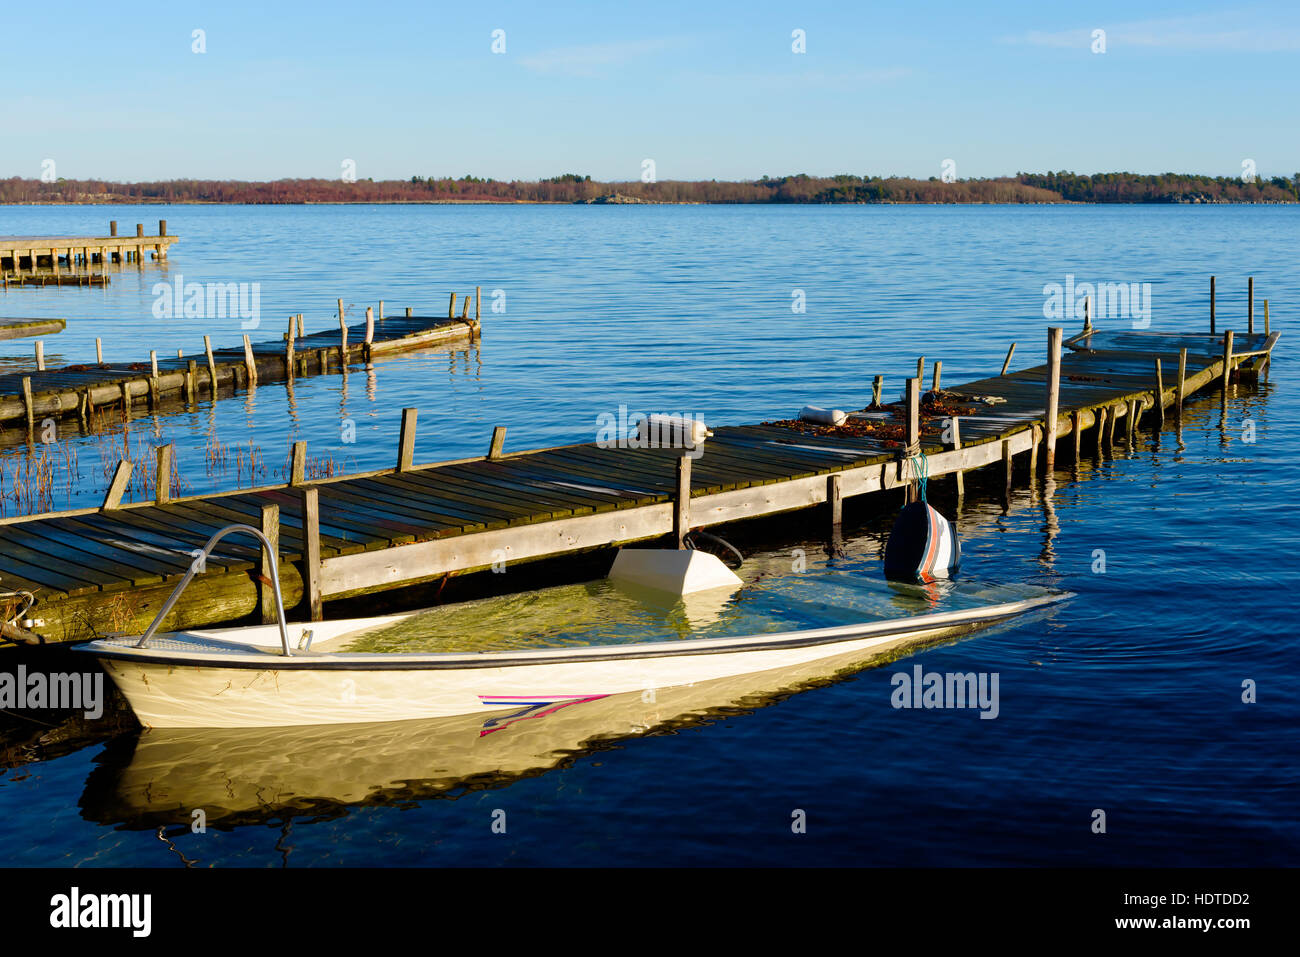 Sunken motorboat moored at a wooden pier and abandoned. Sea is motionless and calm. Stock Photo